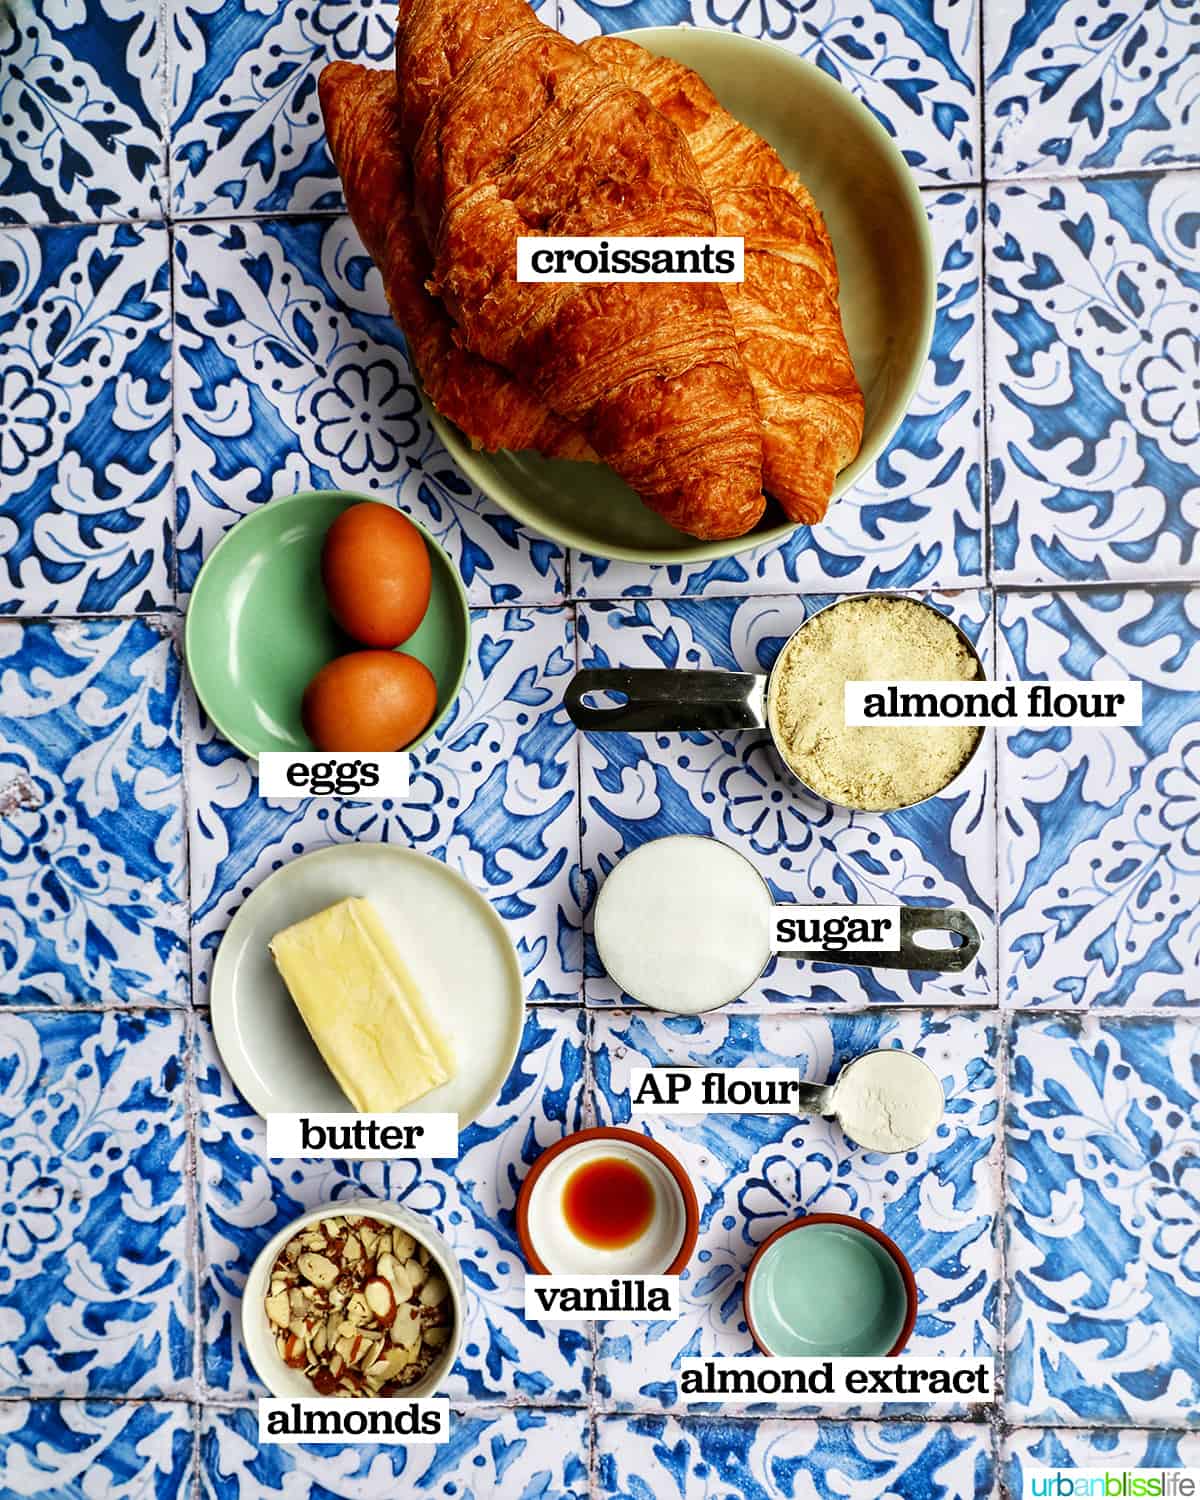 ingredients to make almond croissants.